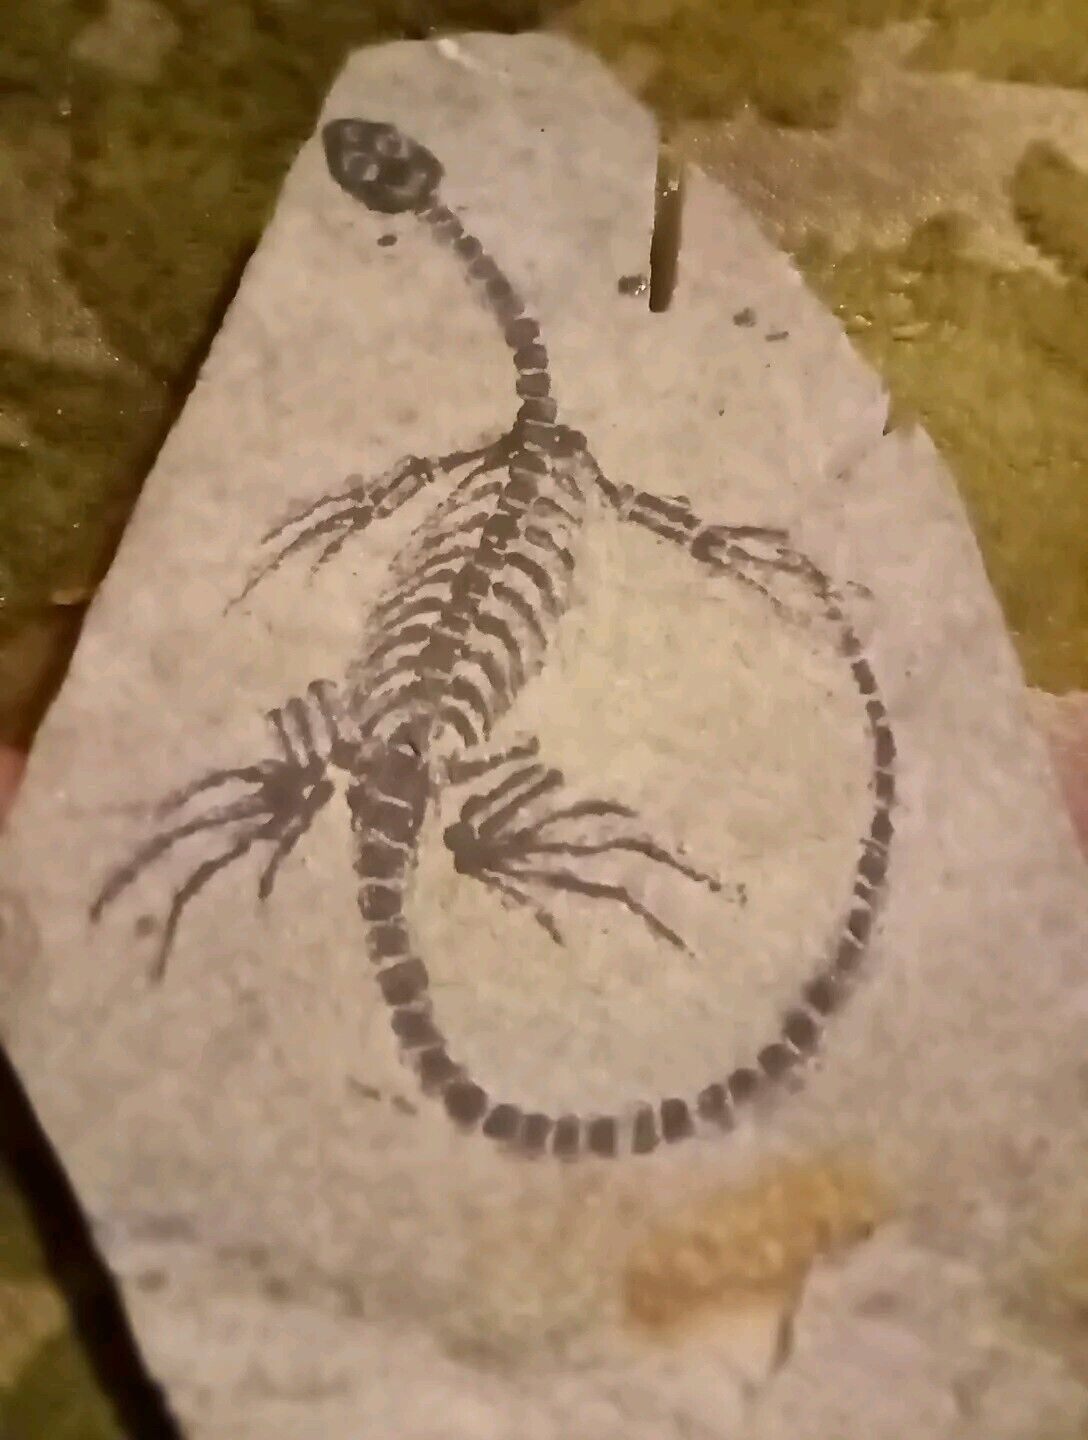 Juvenile Nothosaurus (Real Fossil) Fossil Collection.WorldWideFossil. Strasburg 